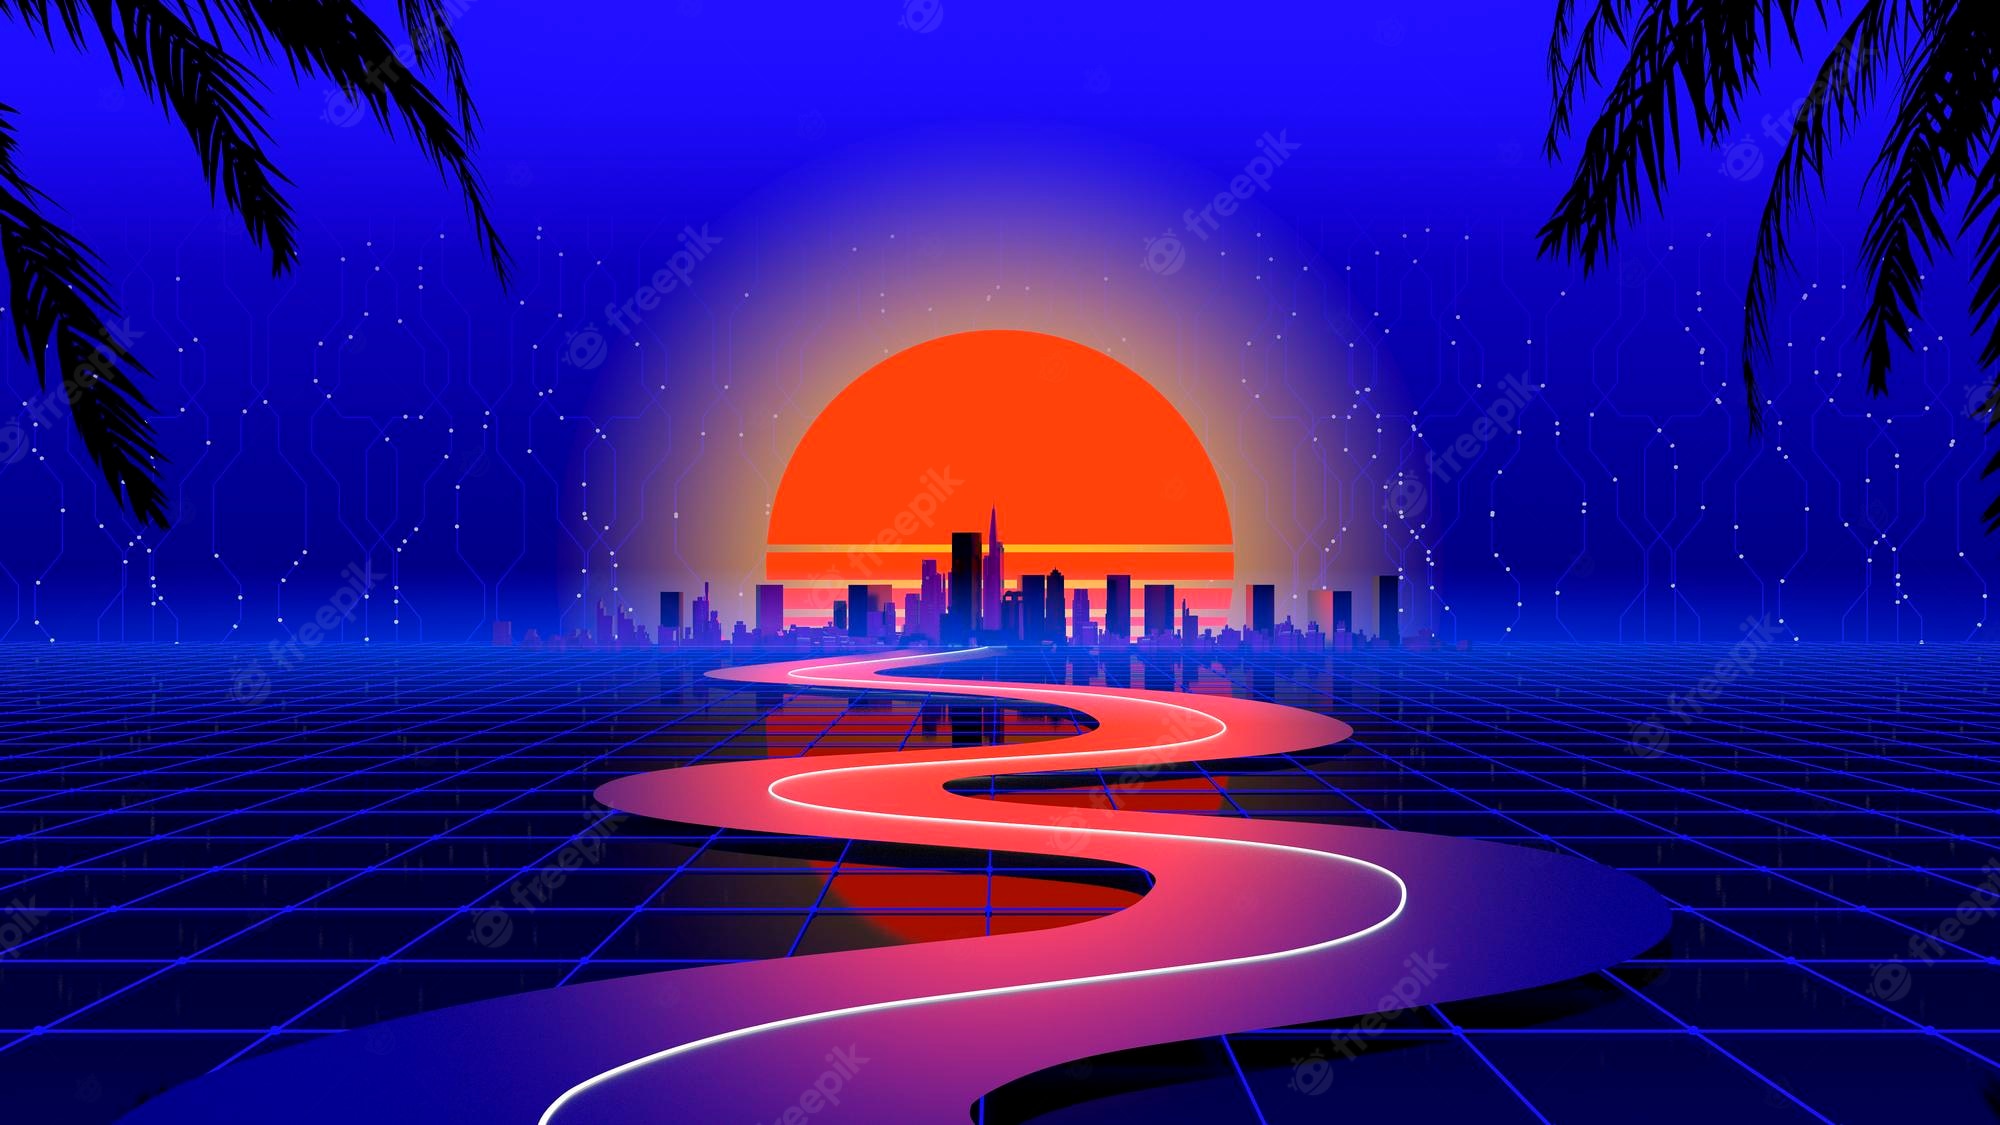 Premium Photod retro wave city background neon night landscape with a futuristic city in the style 80s